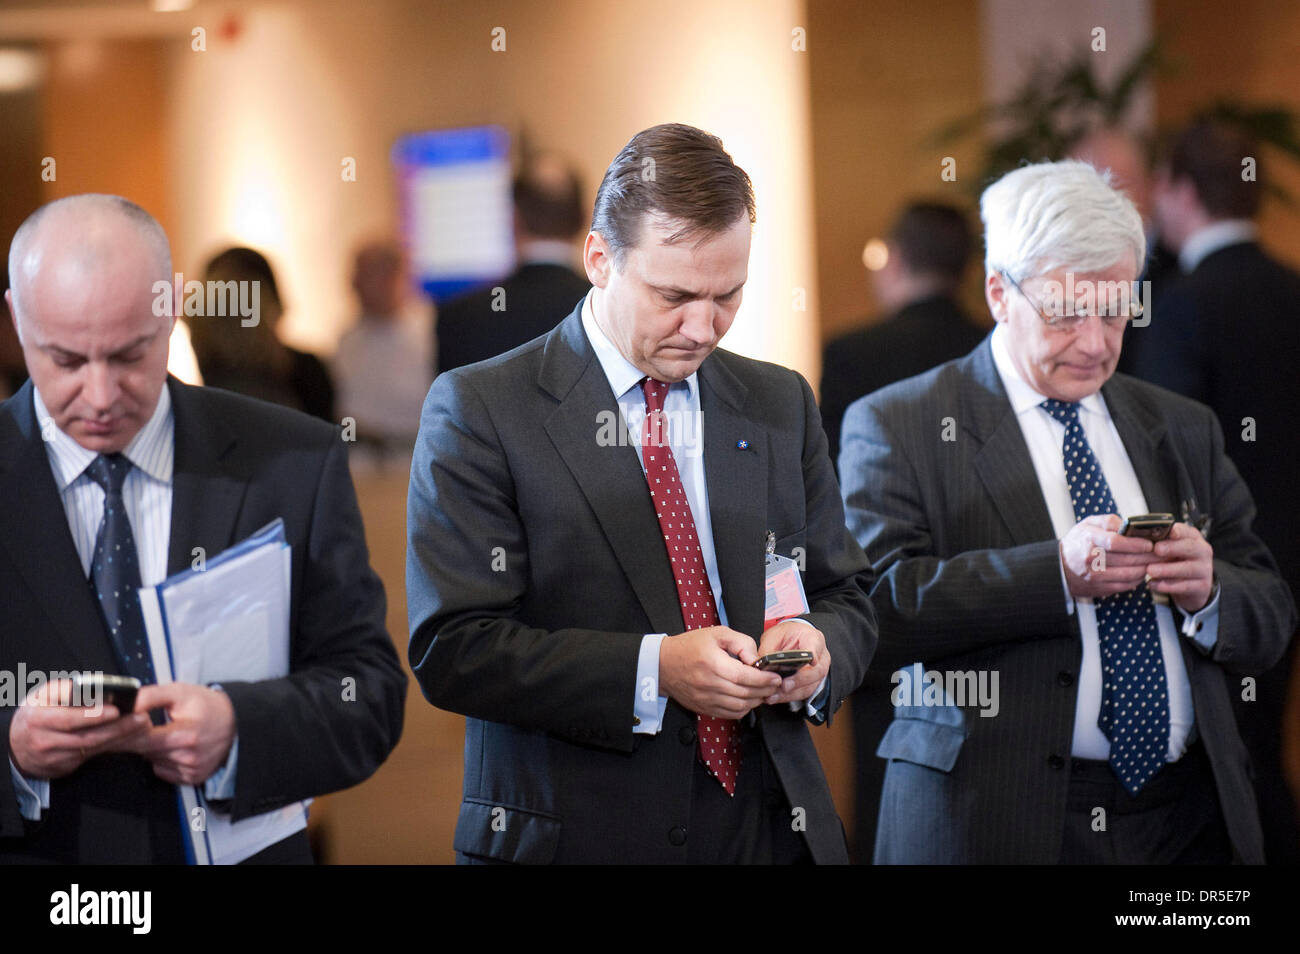 Mar 05, 2009 - Brussels, Belgium - Polish Foreign Minister RADEK SIKORSKI (L) texts on his cell phone during a NATO Foreign ministers meeting in Brussels, Belgium on 2009-03-05. NATO Secretary General Jaap de Hoop Scheffer called for the alliance to resume top-level talks with Russia which have been frozen since last August's war in Georgia. (Credit Image: © Wiktor Dabkowski/ZUMA P Stock Photo